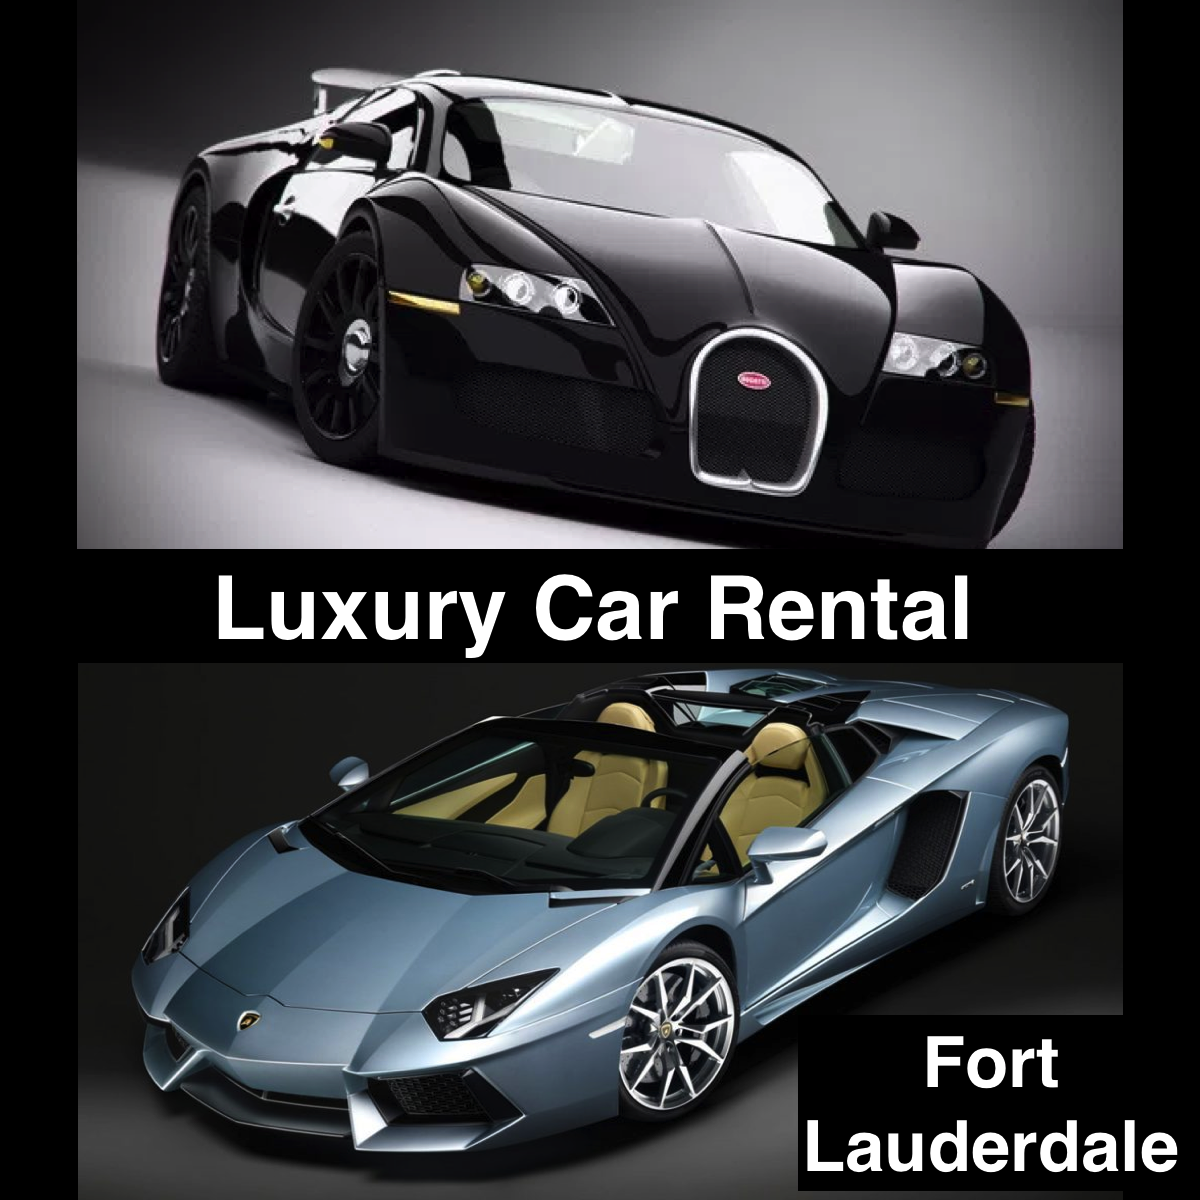 Luxury Car Rental -Fort Lauderdale- Exotic Cars - All Best Top 10 Lists